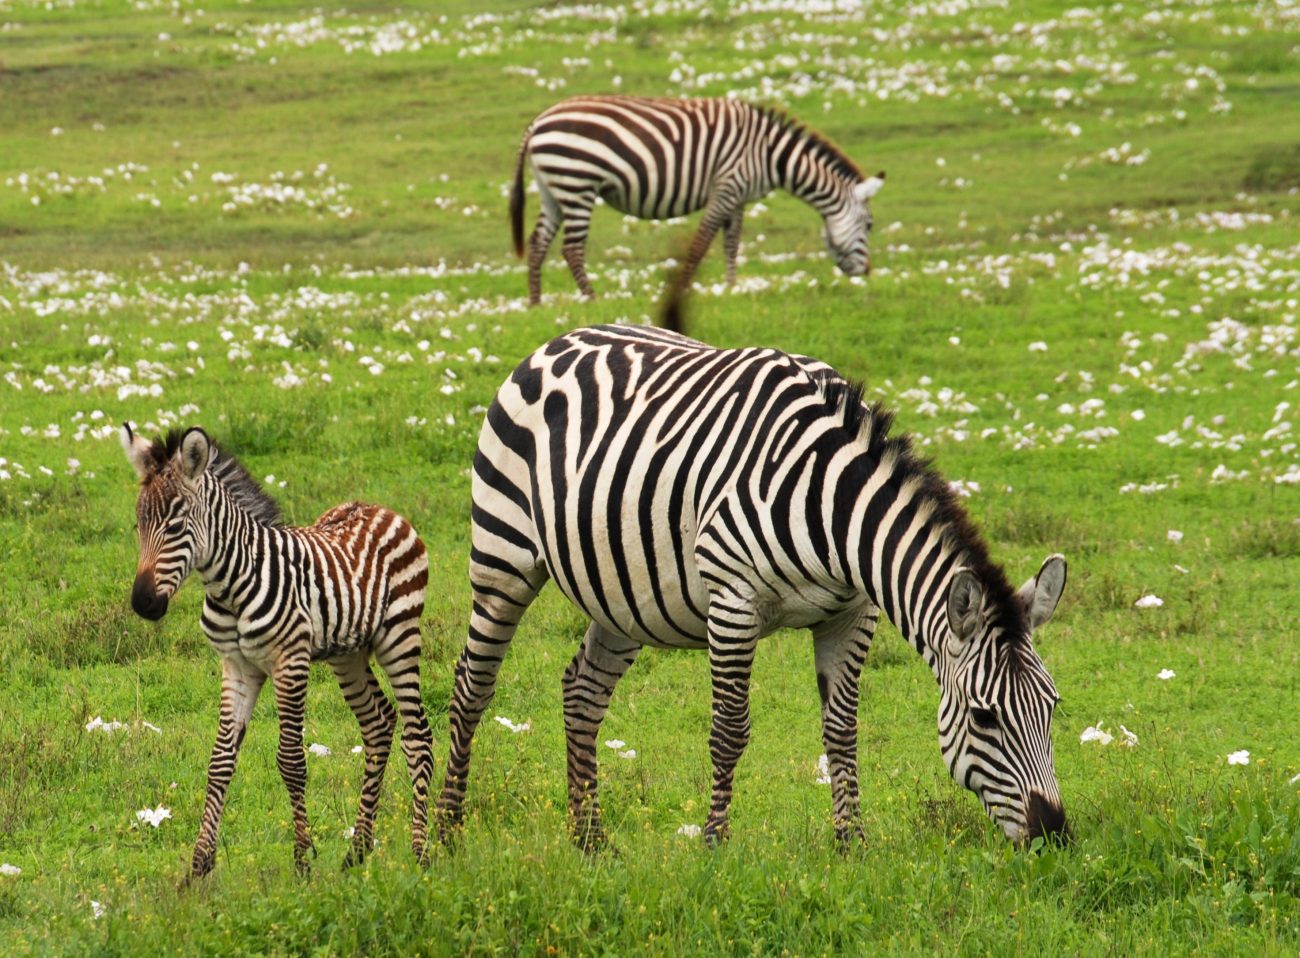 3. Black zebra stripes.  Zebras' black stripes are not only aesthetically beautiful;  it is also the trademark of each animal.  The biologist emphasizes that each zebra is born with a unique stripe pattern, which ensures that no pattern is repeated in other zebras.  - Pixels/Reproduction/ND